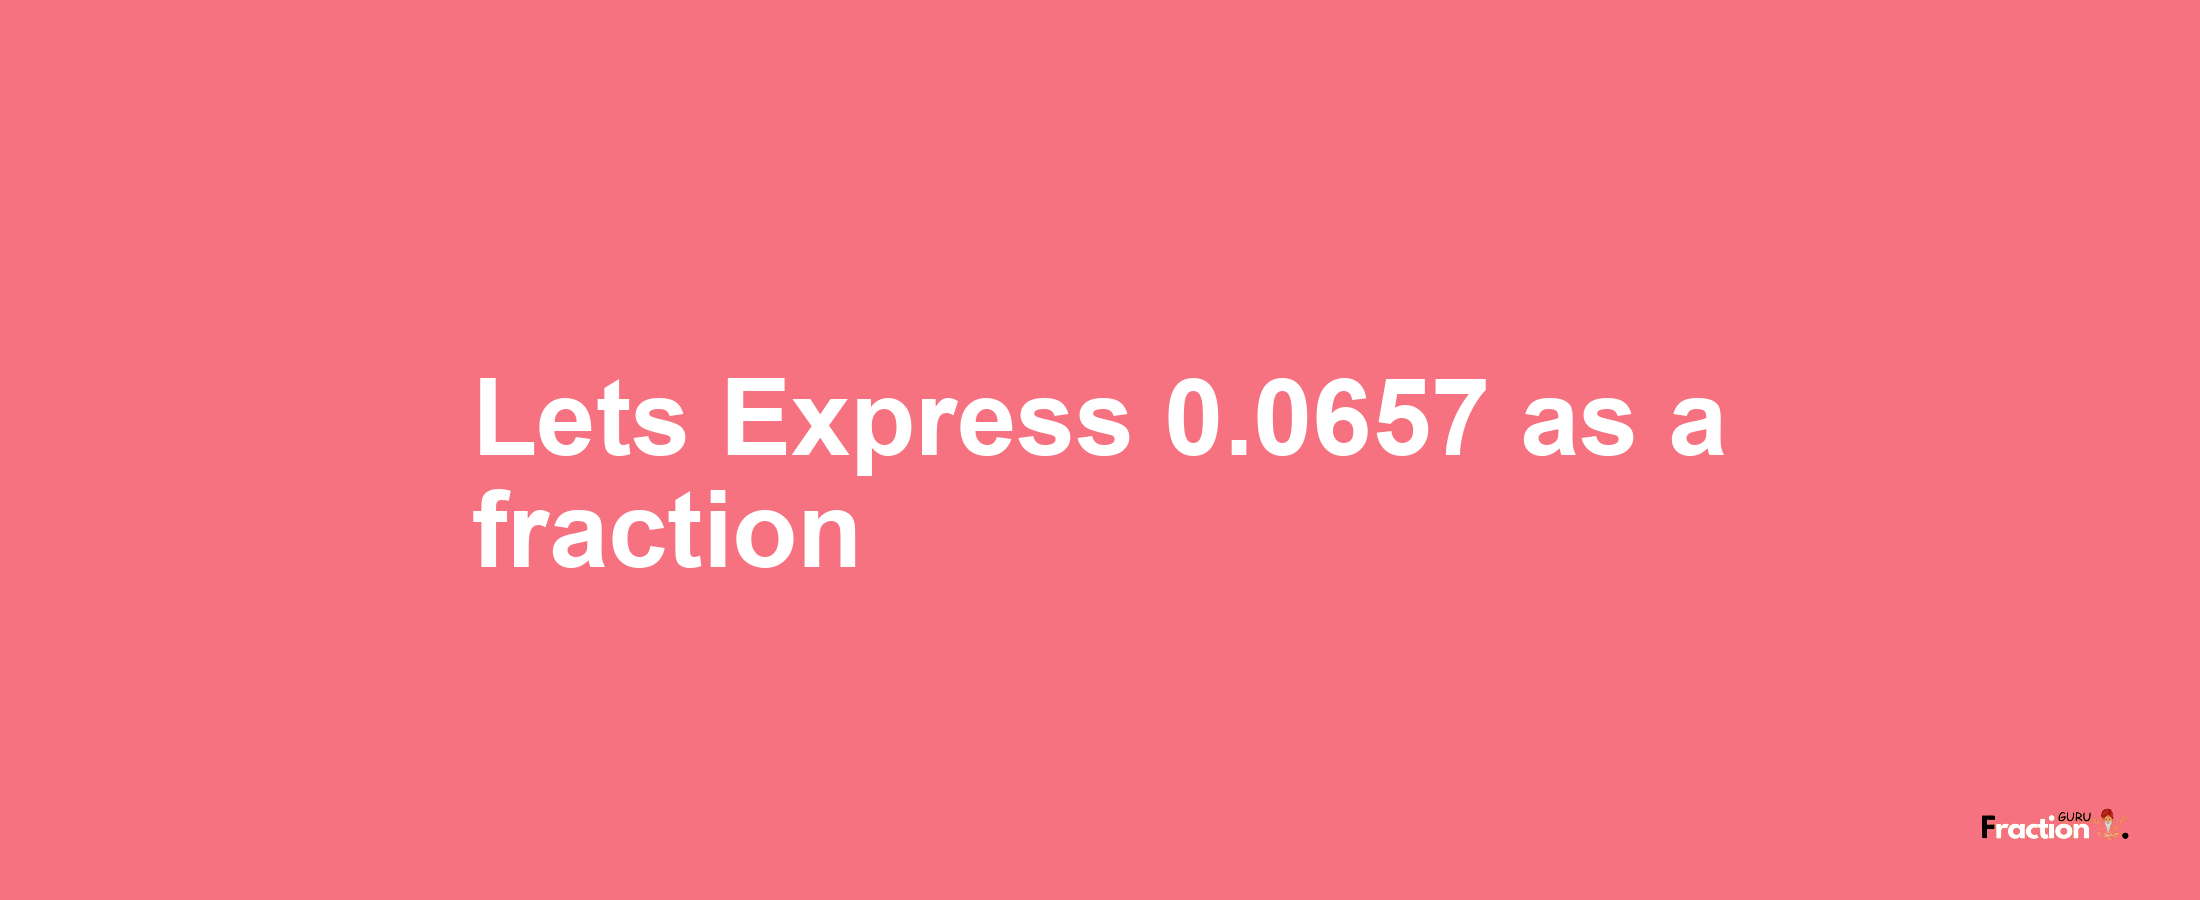 Lets Express 0.0657 as afraction